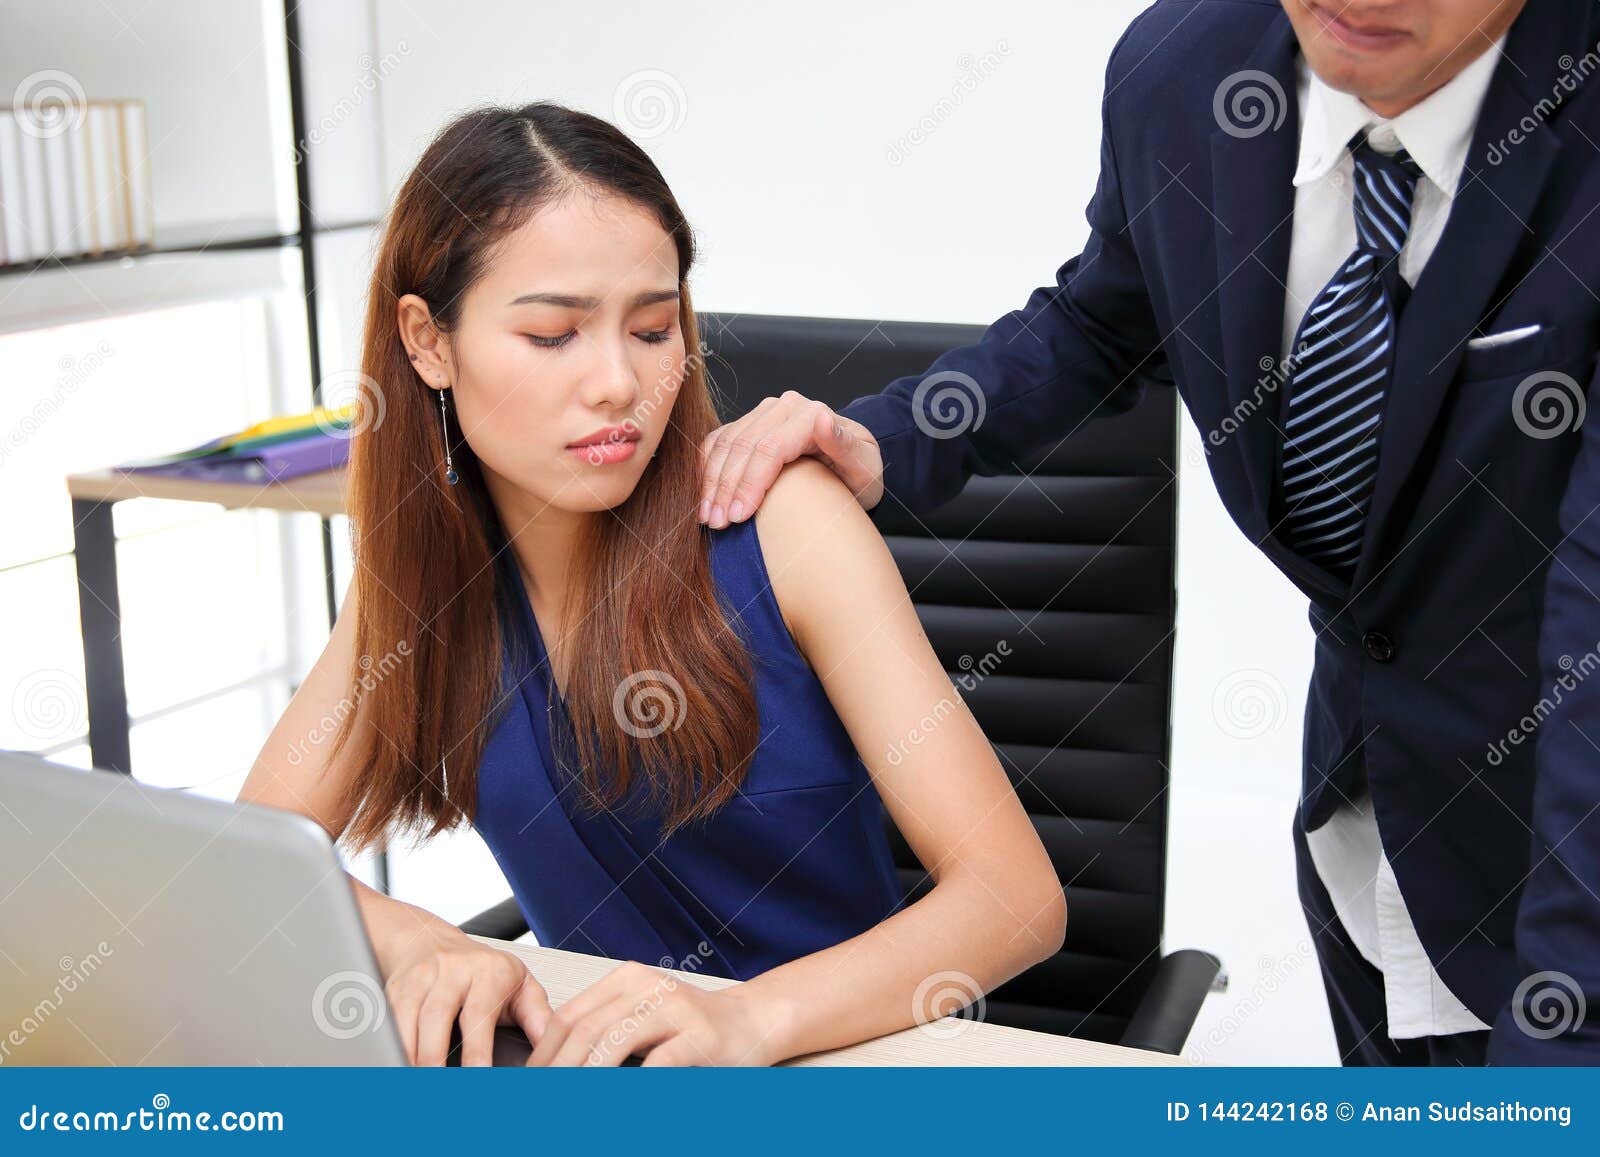 Man Boss Touching Woman Shoulder In Workplace Of Office Sexual